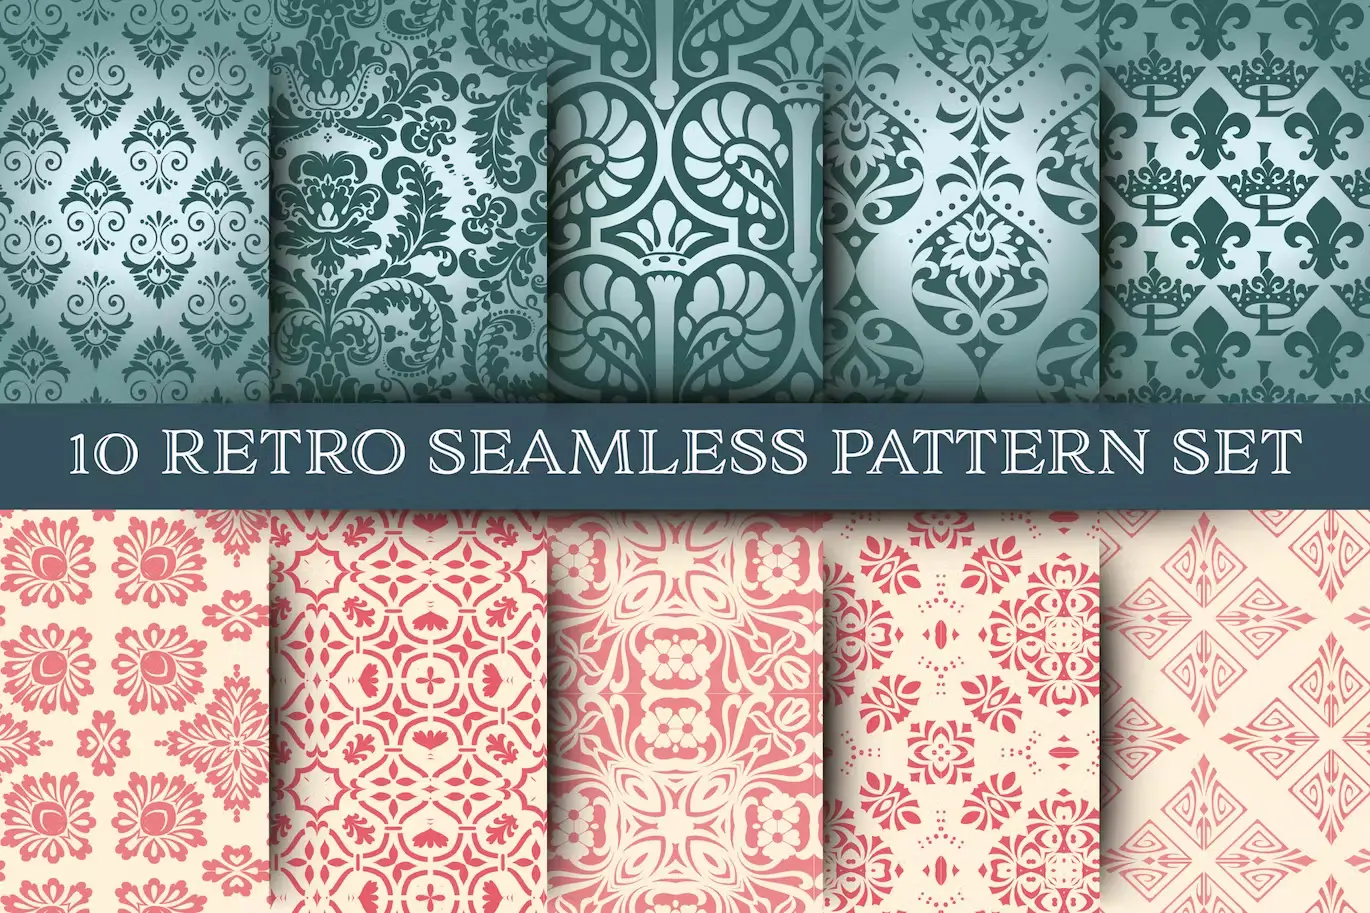 25 Free Photoshop Patterns To Improve Your Creative Look